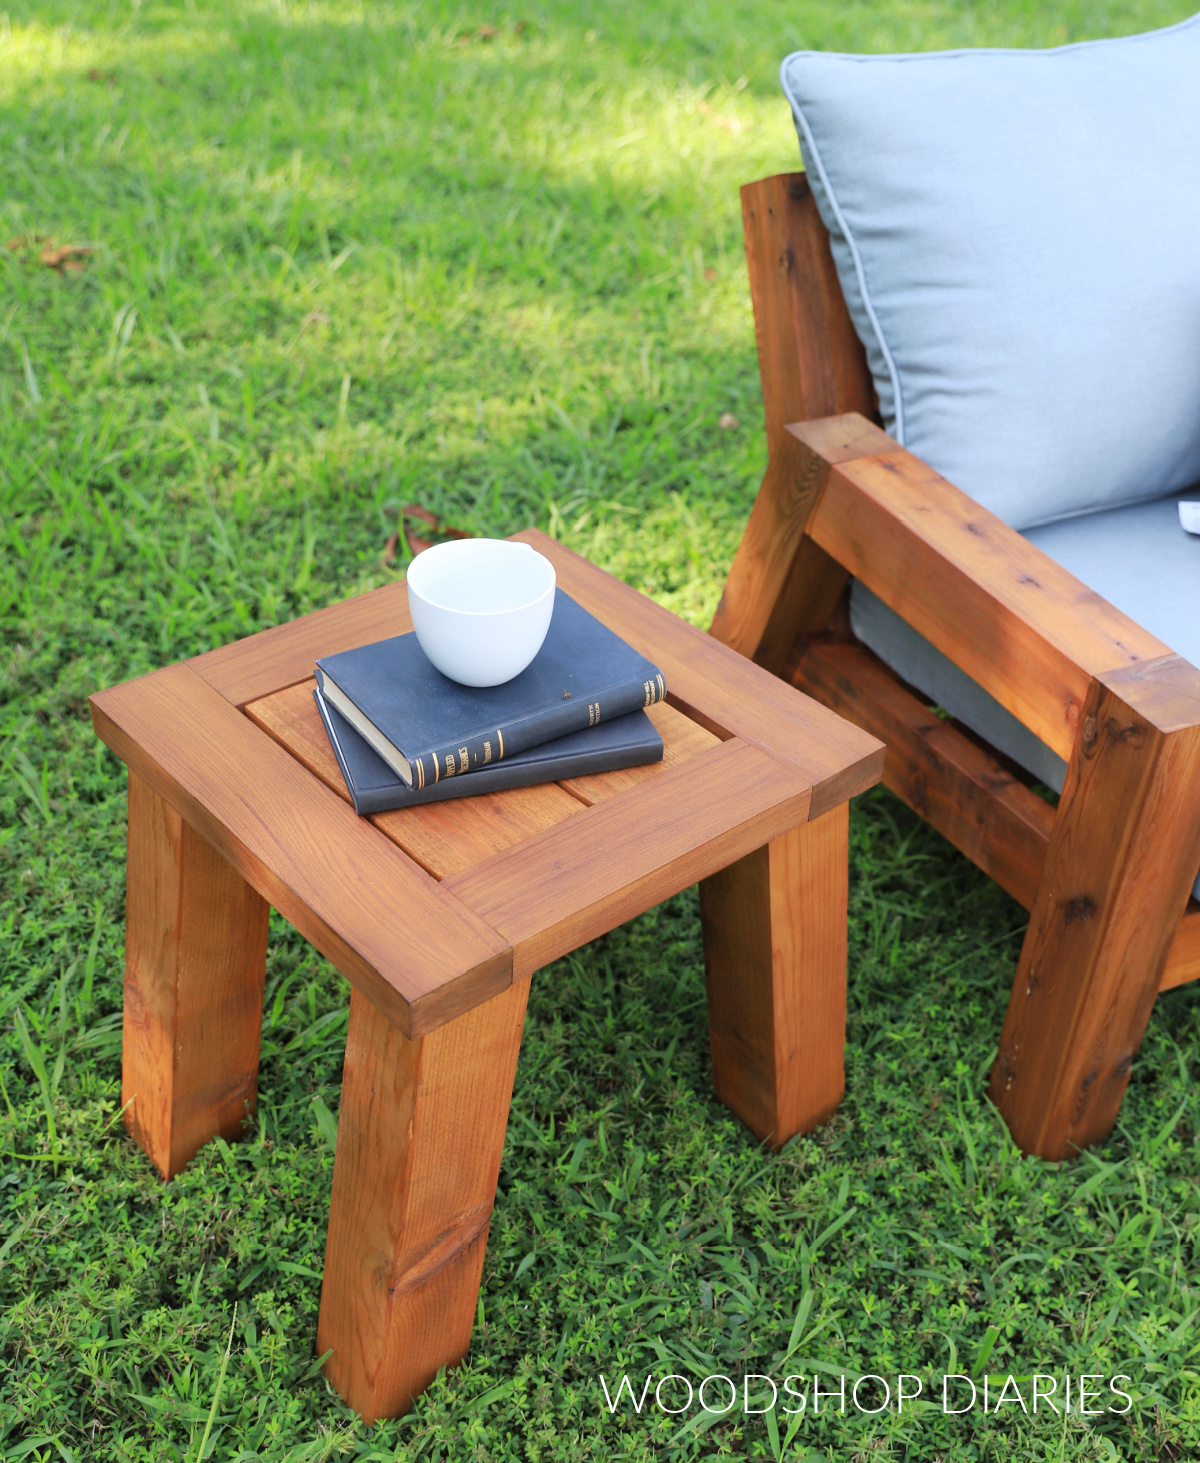 Finished outdoor side table with chunky legs and Cabot Australian Timber Oil finish next to loveseat in grassy area